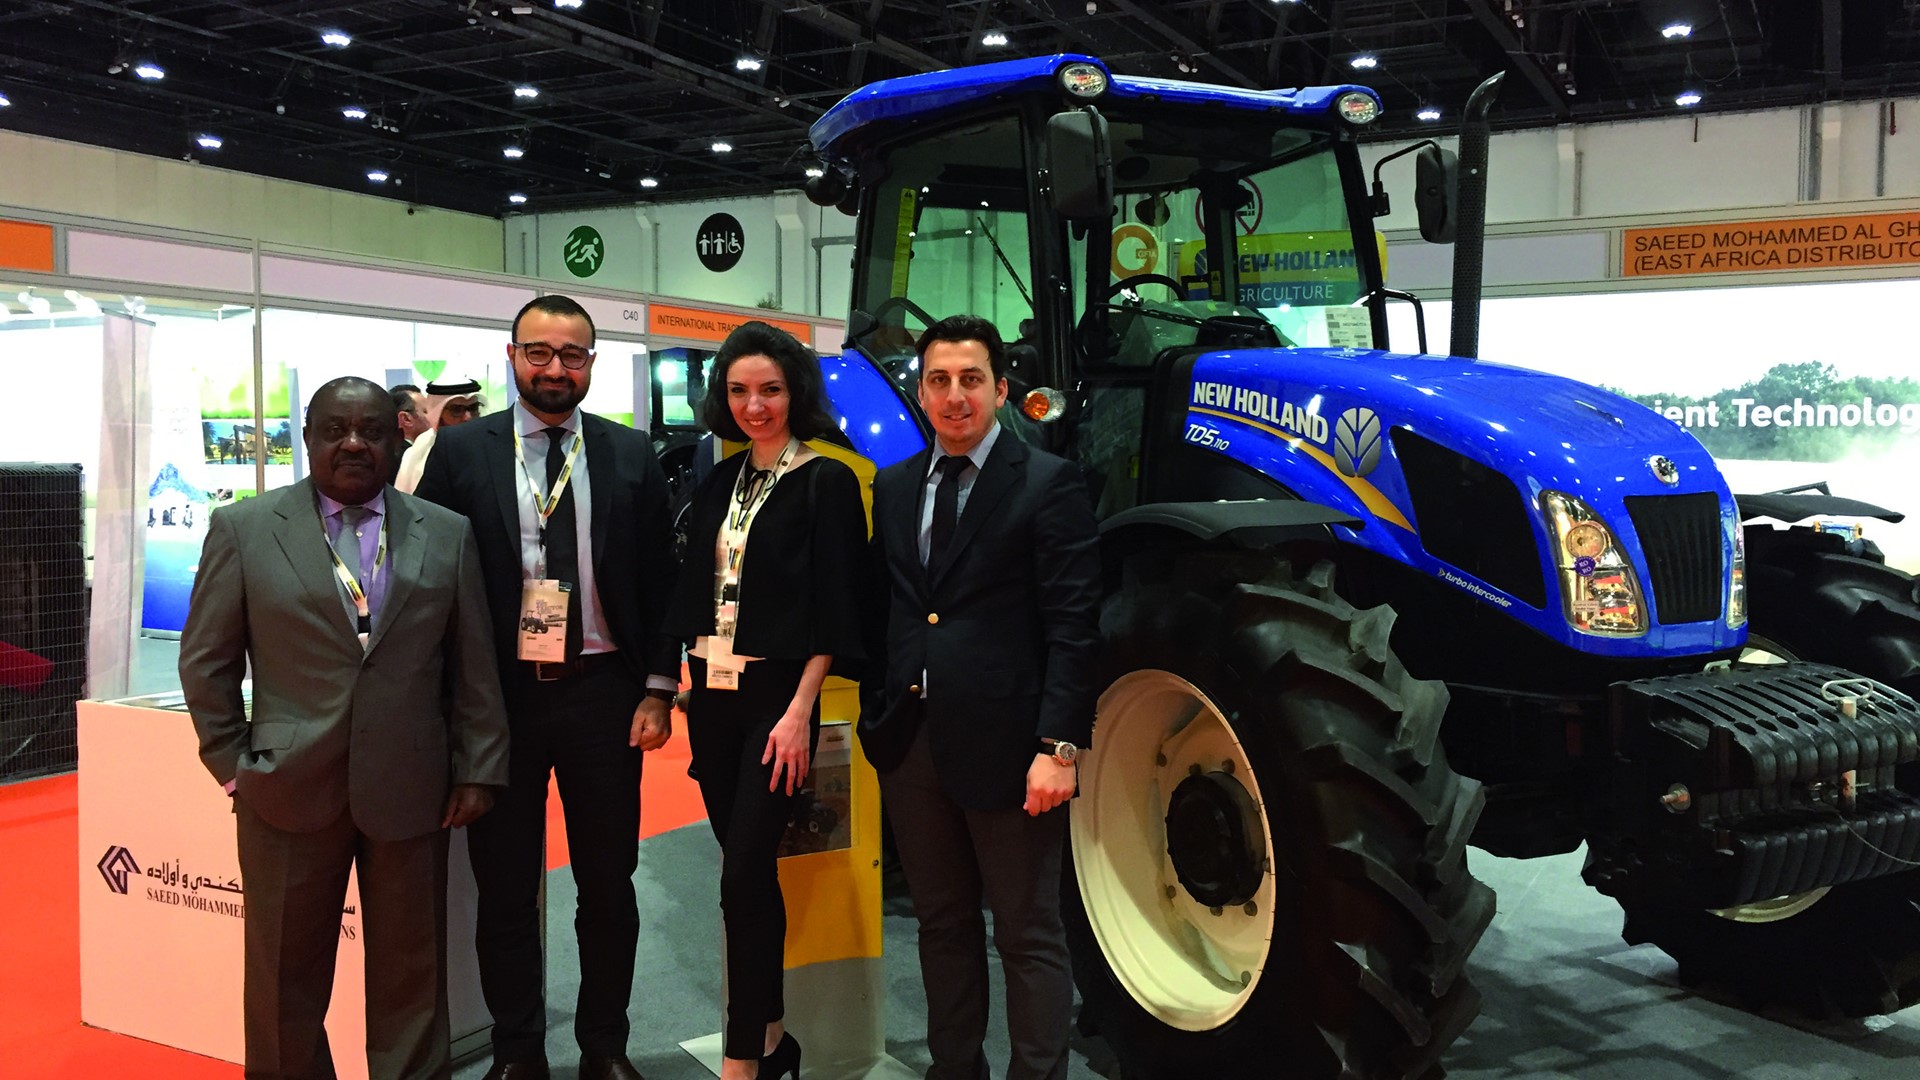 The delegation at the Global Forum for Innovations in Agriculture in Abu Dhabi